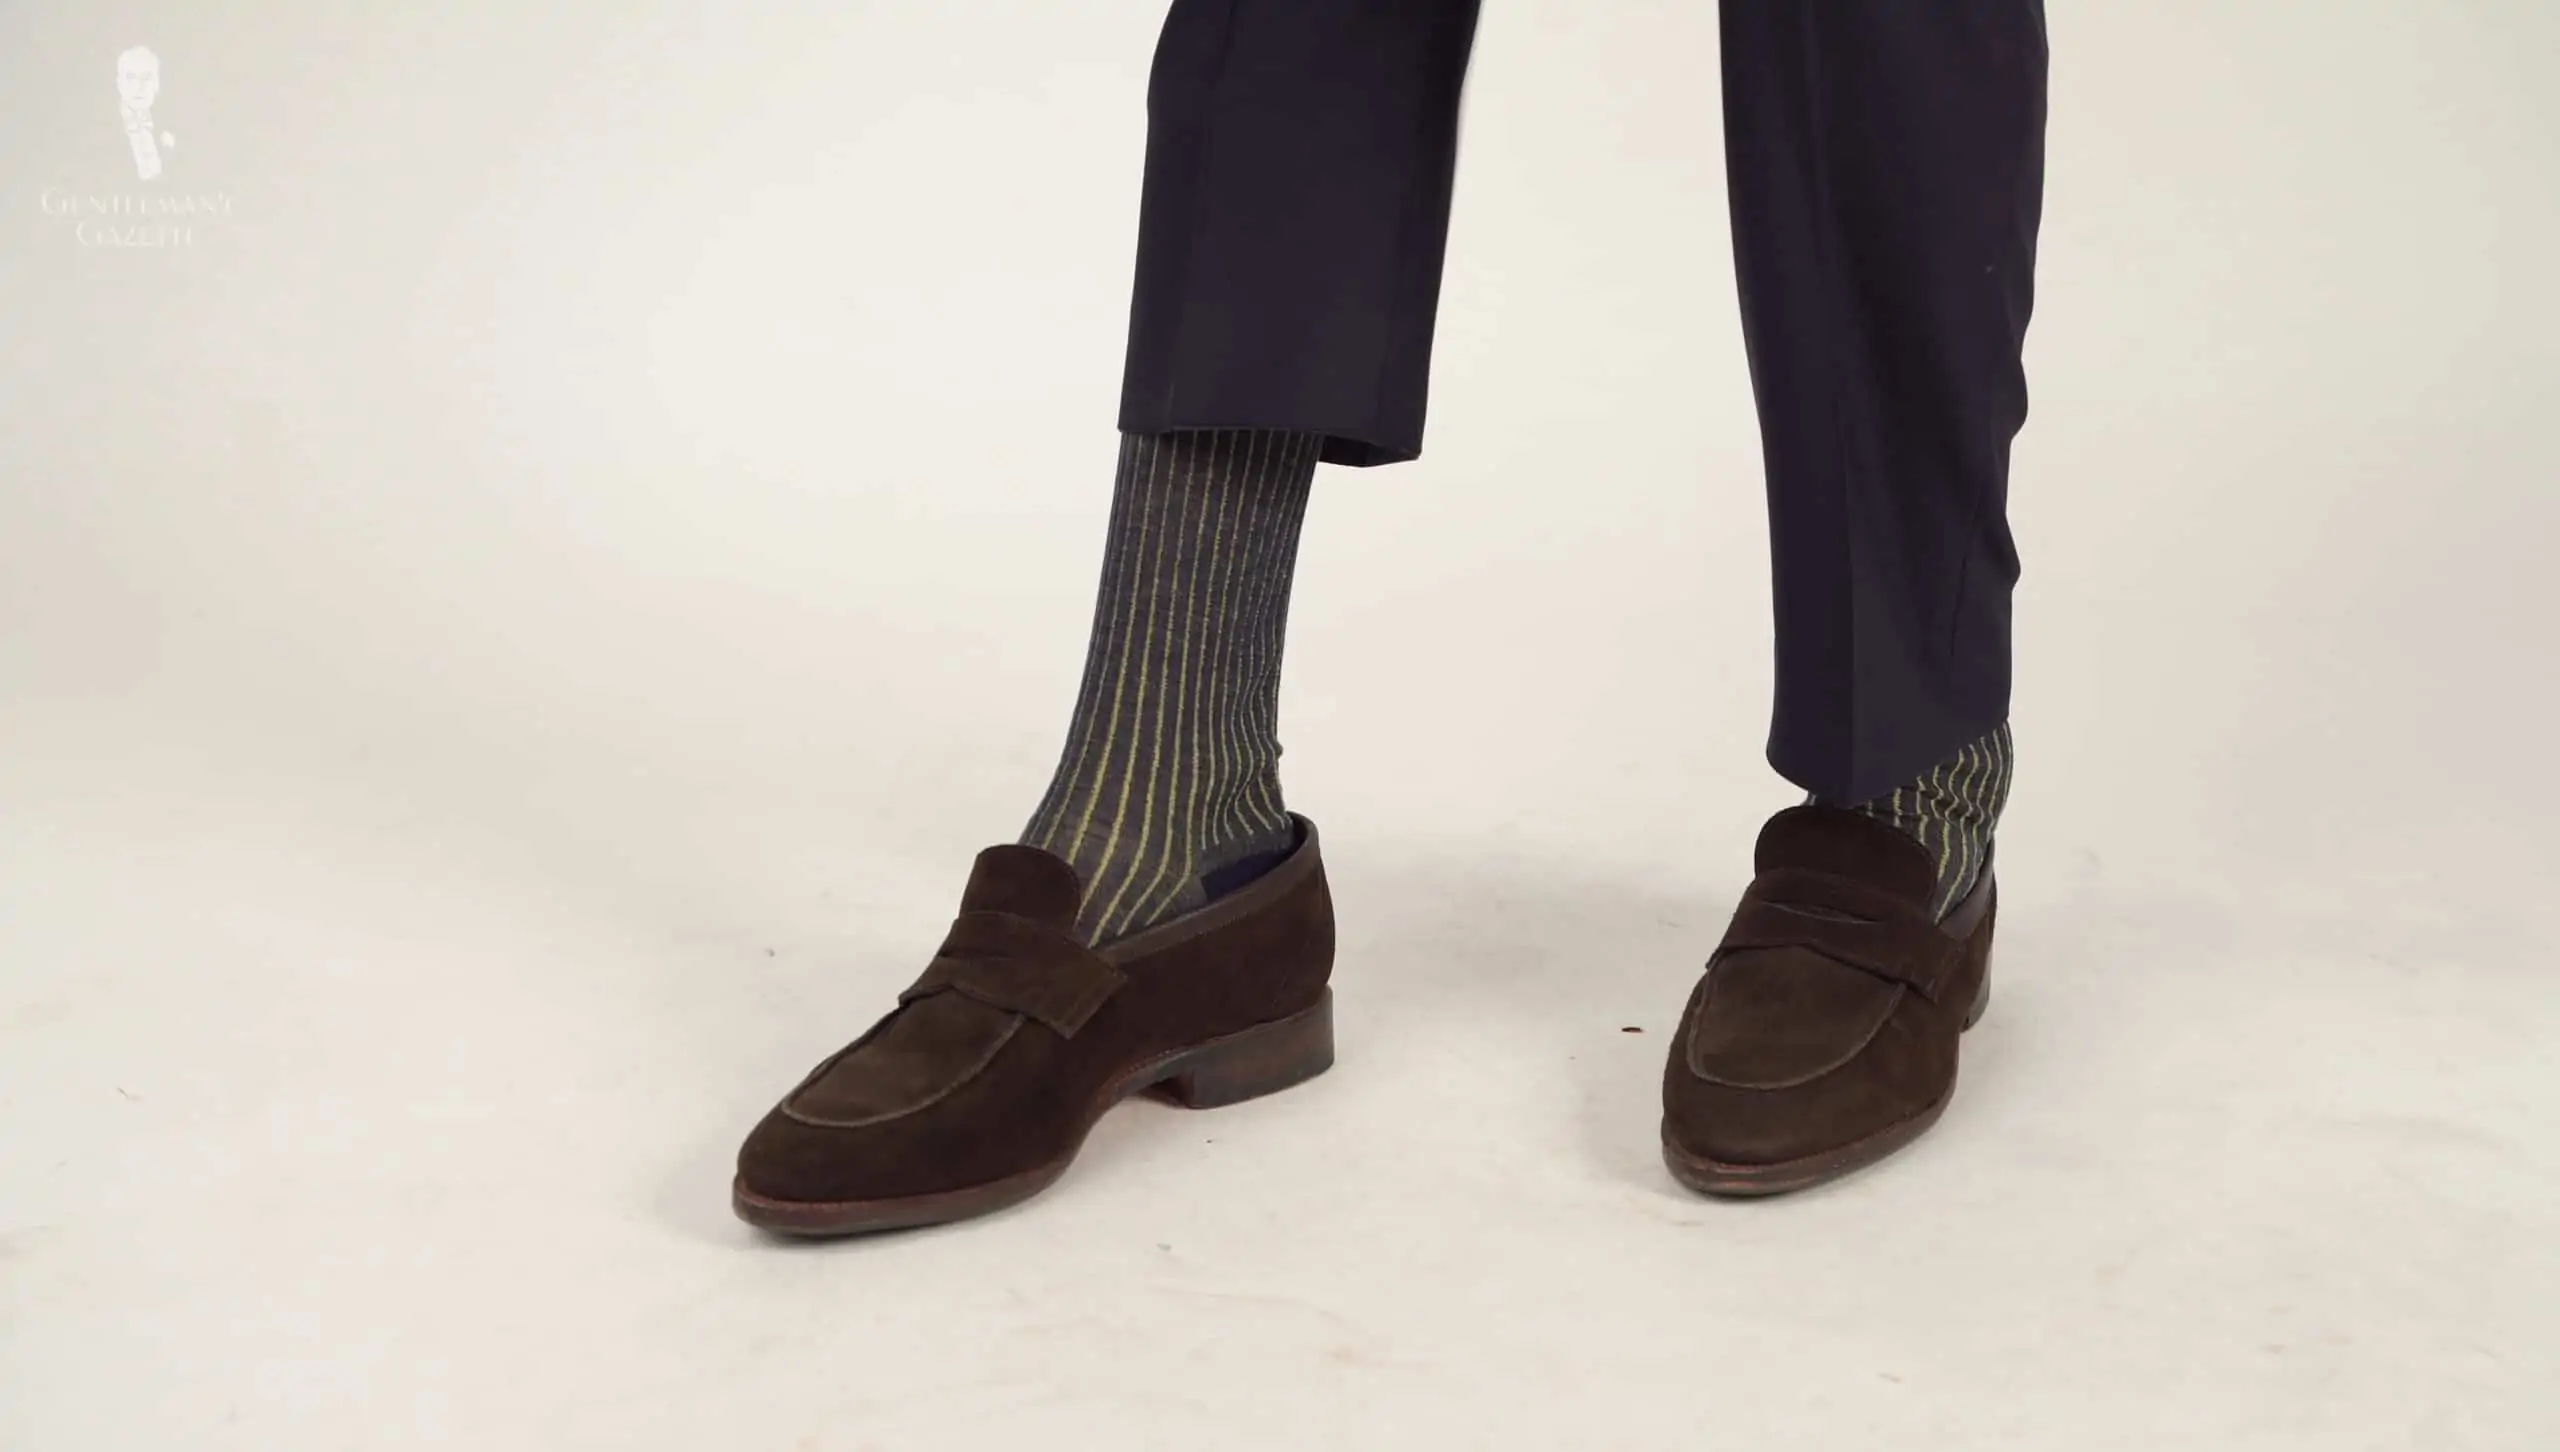 suede-loafers-from-Meermin-paired-with-shadow-striped-socks-in-navy-blue-and-yellow.